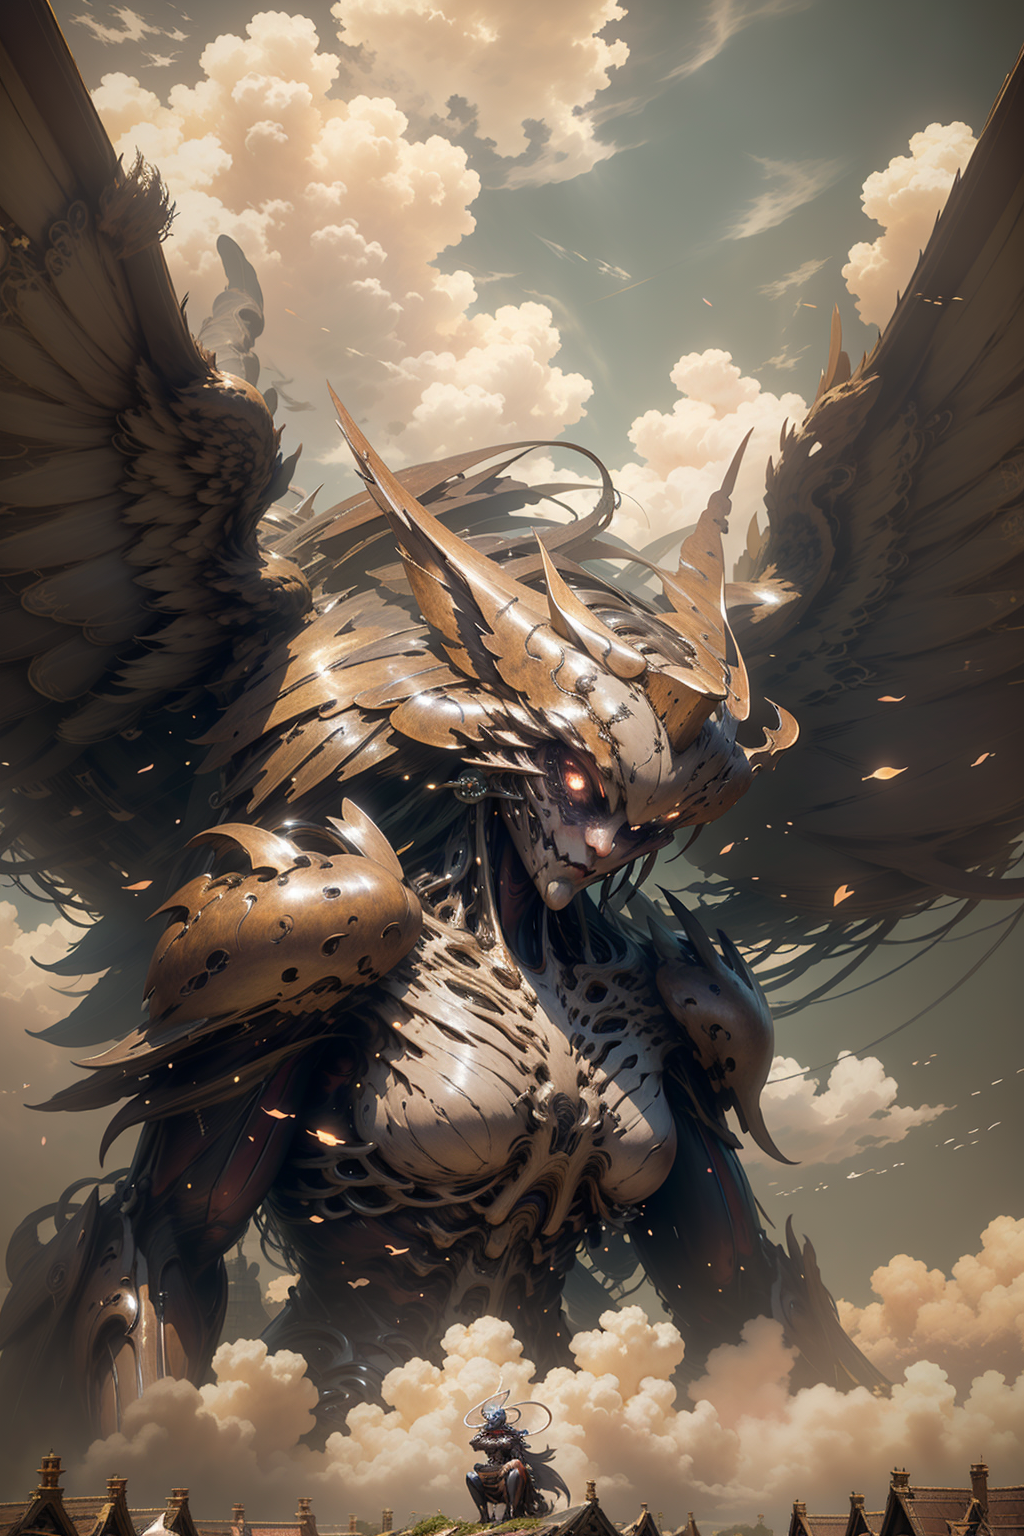 An Angelic Statue with Glowing Eyes, Wings, and Armor, Staring at the Sky